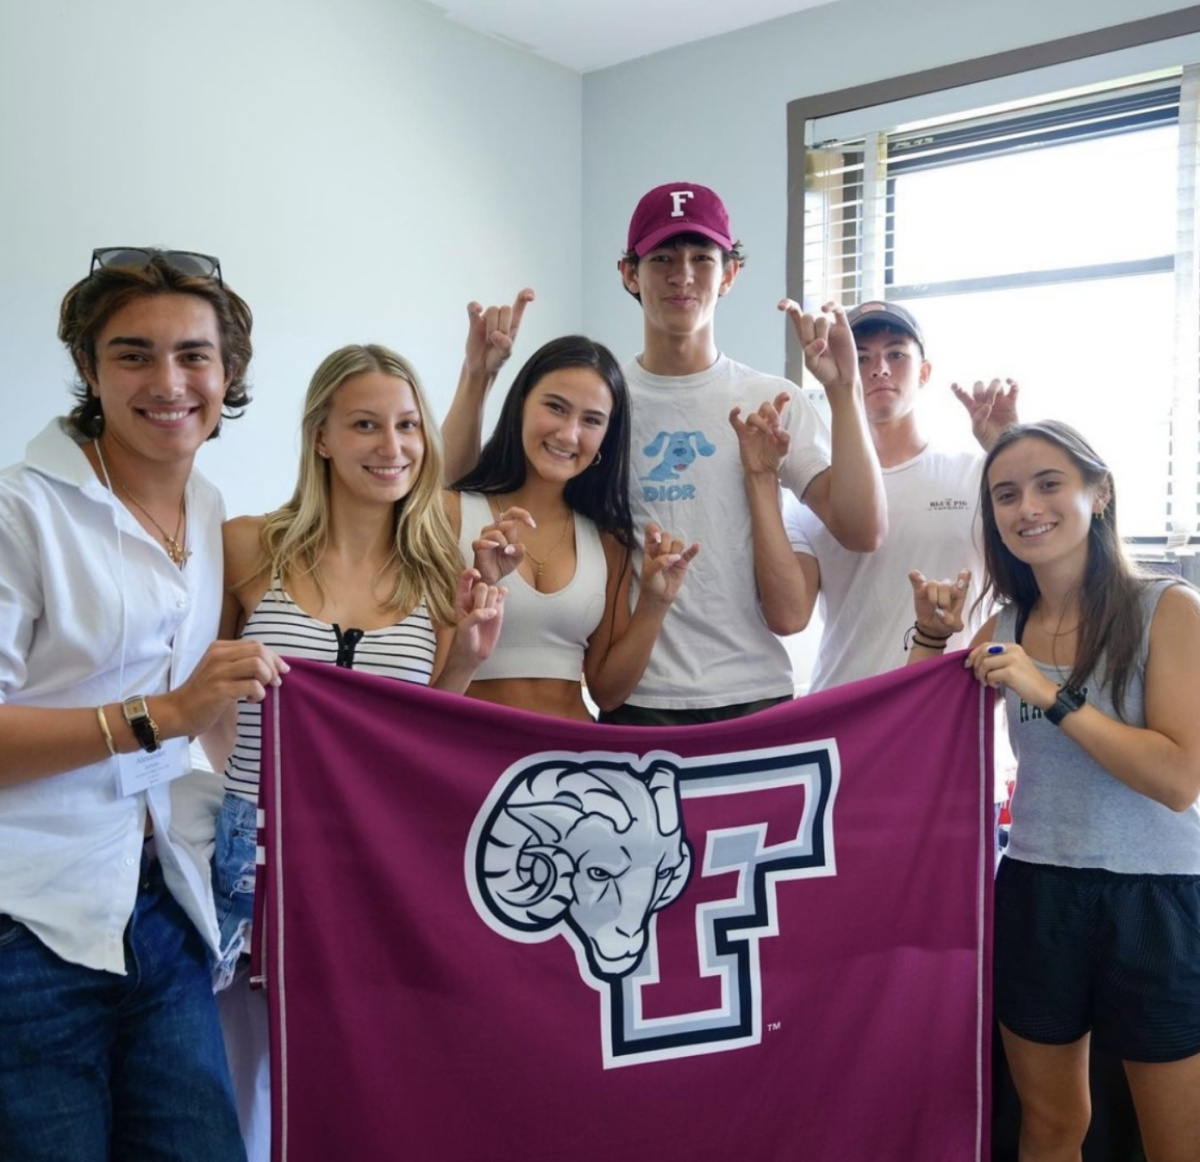 First-year+students%2C+who+began+orientation+programming+immediately+after+move-in%2C+were+welcomed+by+returning+students+and+orientation+leaders.+%28Courtesy+of+Instagram%29